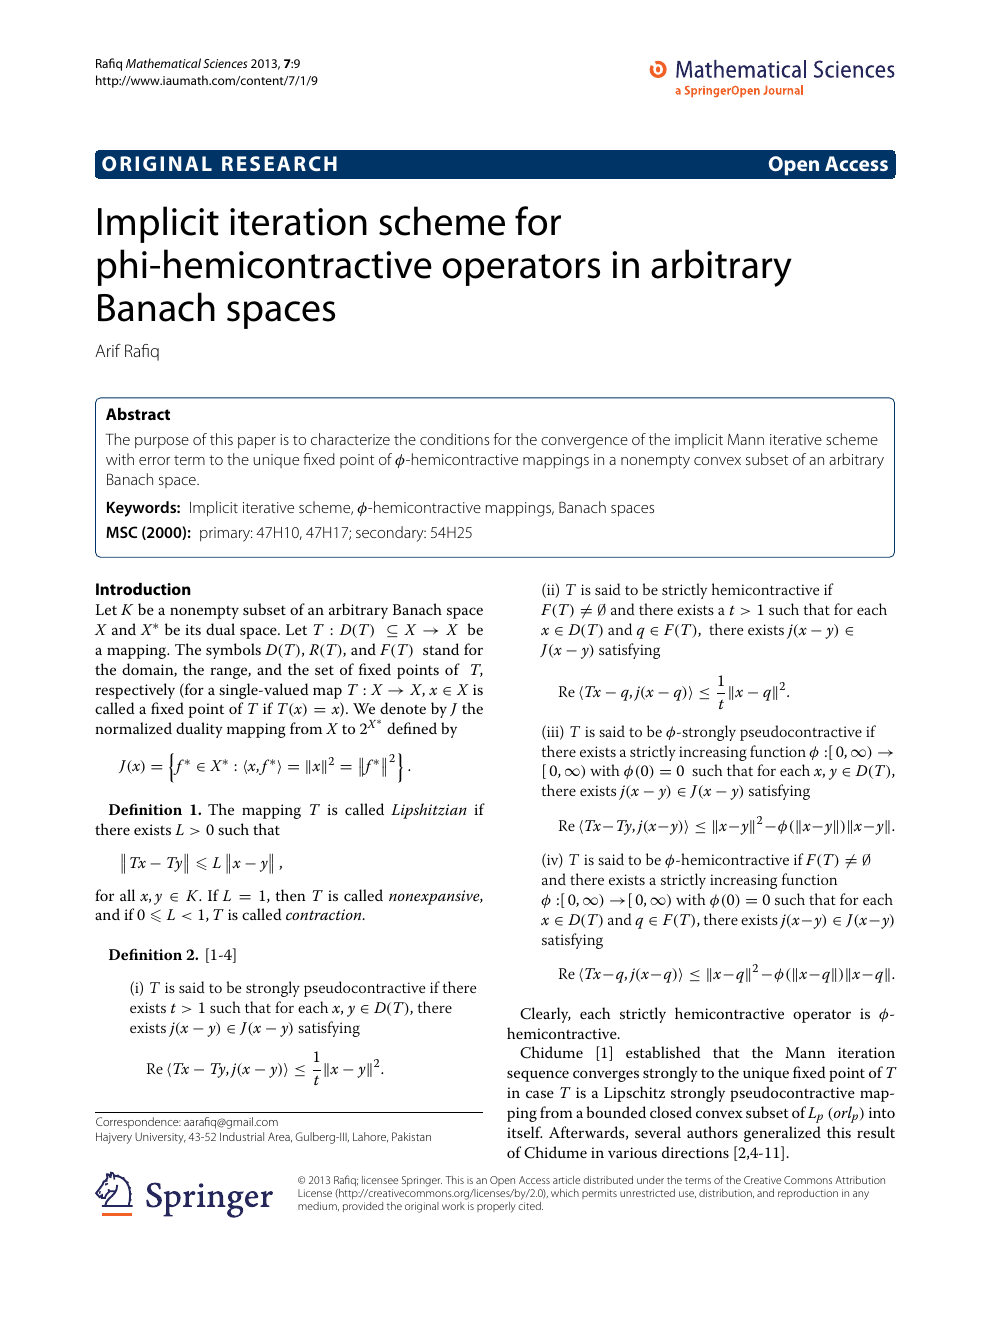 Implicit Iteration Scheme For Phi Hemicontractive Operators In Arbitrary Banach Spaces Topic Of Research Paper In Mathematics Download Scholarly Article Pdf And Read For Free On Cyberleninka Open Science Hub